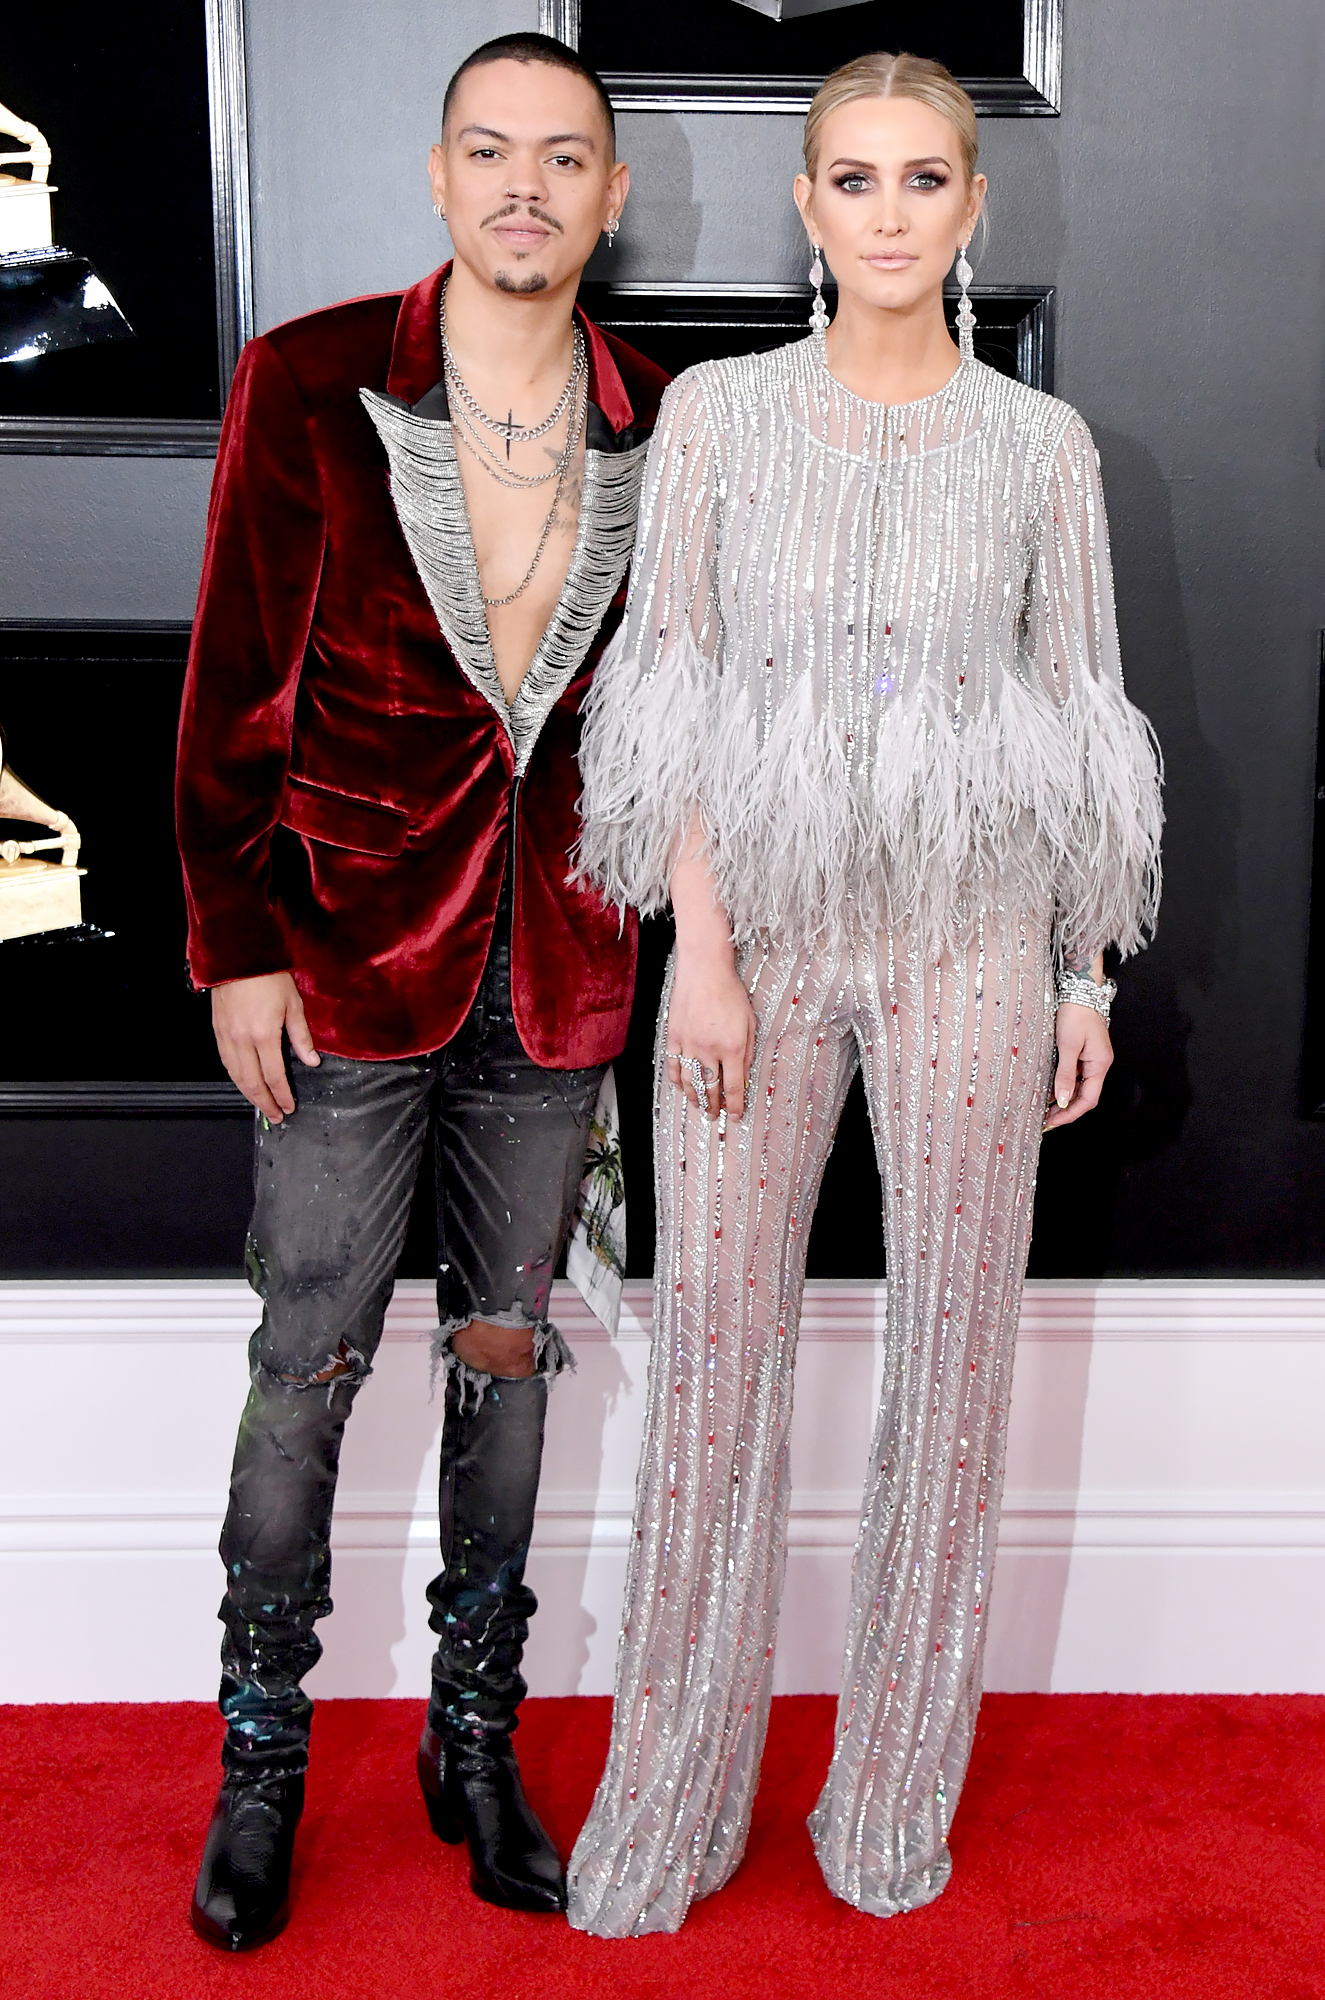 Grammys 2019 Red Carpet Hottest Couples, Style